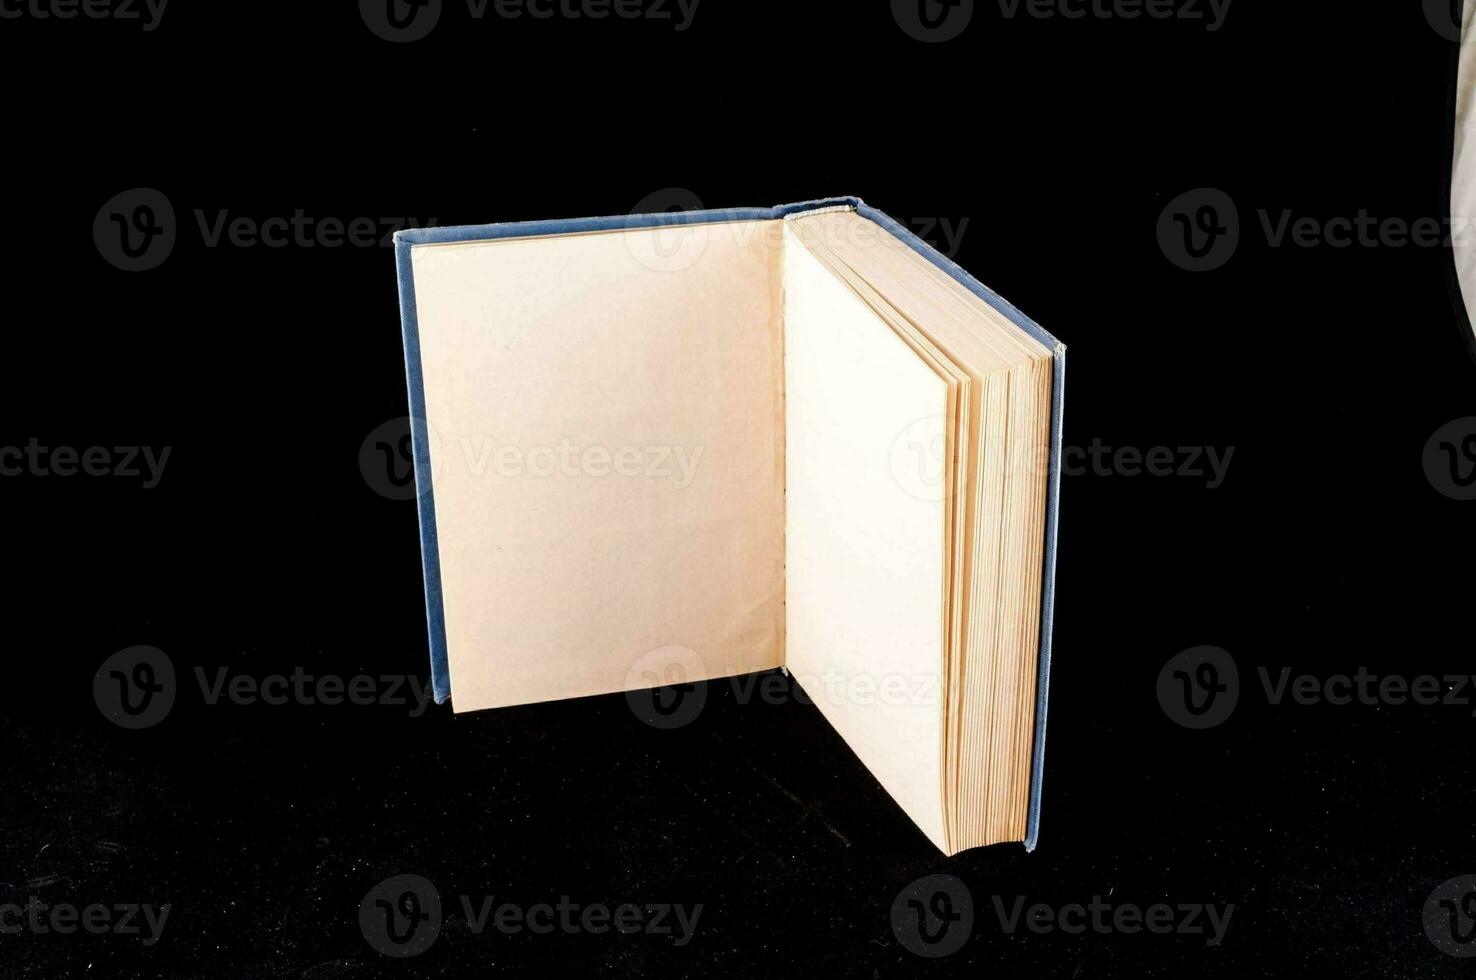 a book open on a black surface with a white object photo